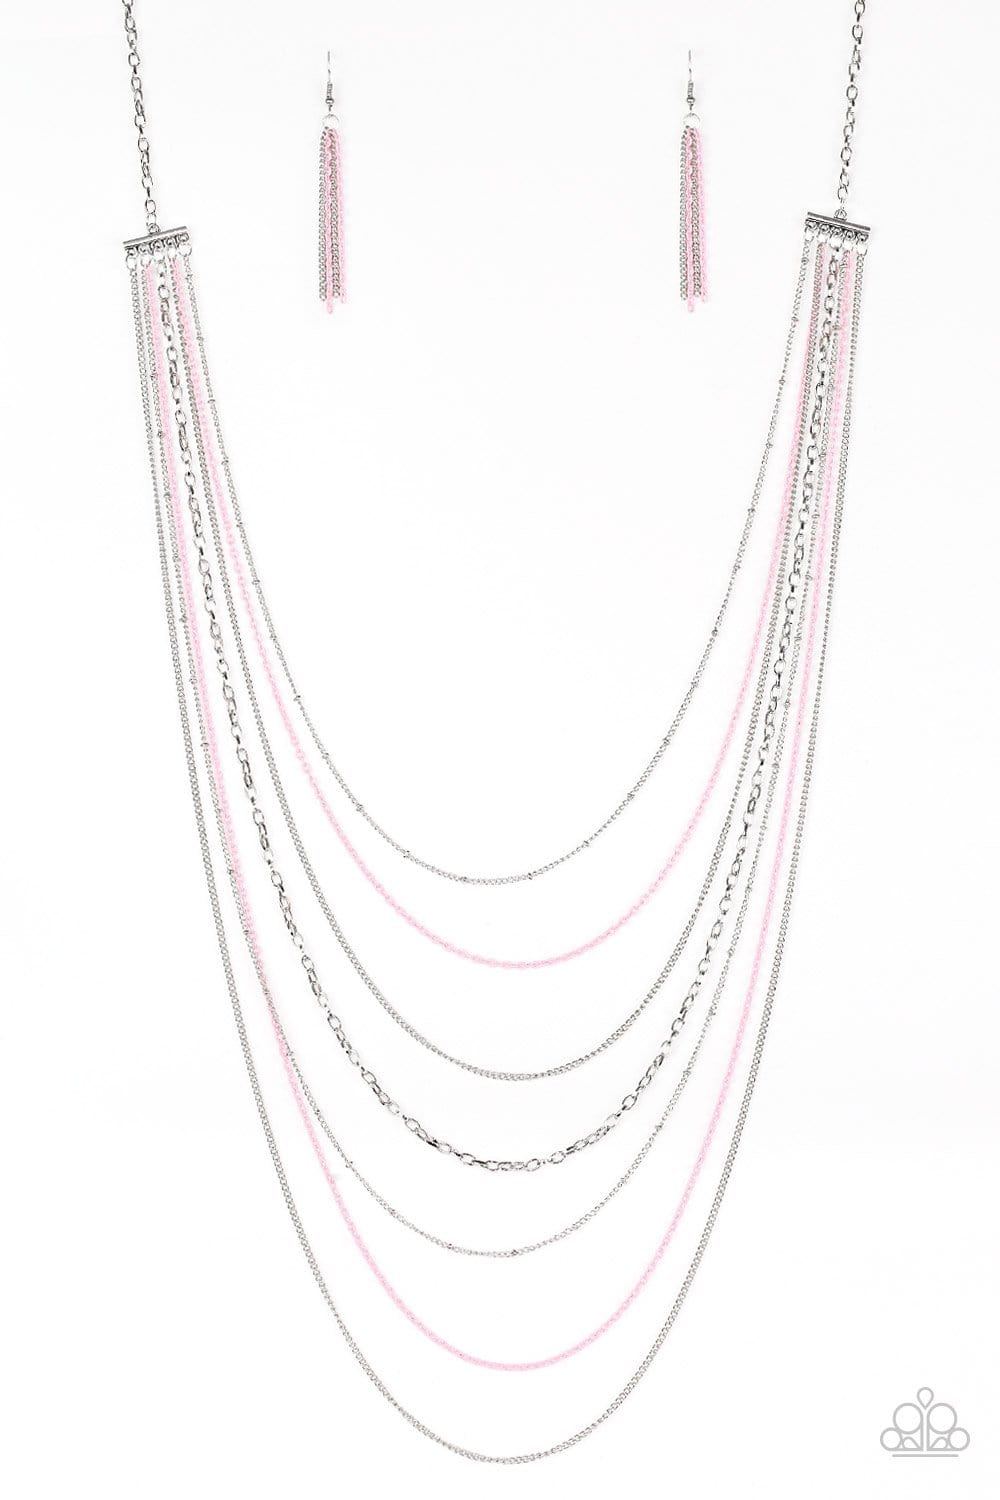 Paparazzi: Radical Rainbows - Pink Chain Necklace - Jewels N’ Thingz Boutique